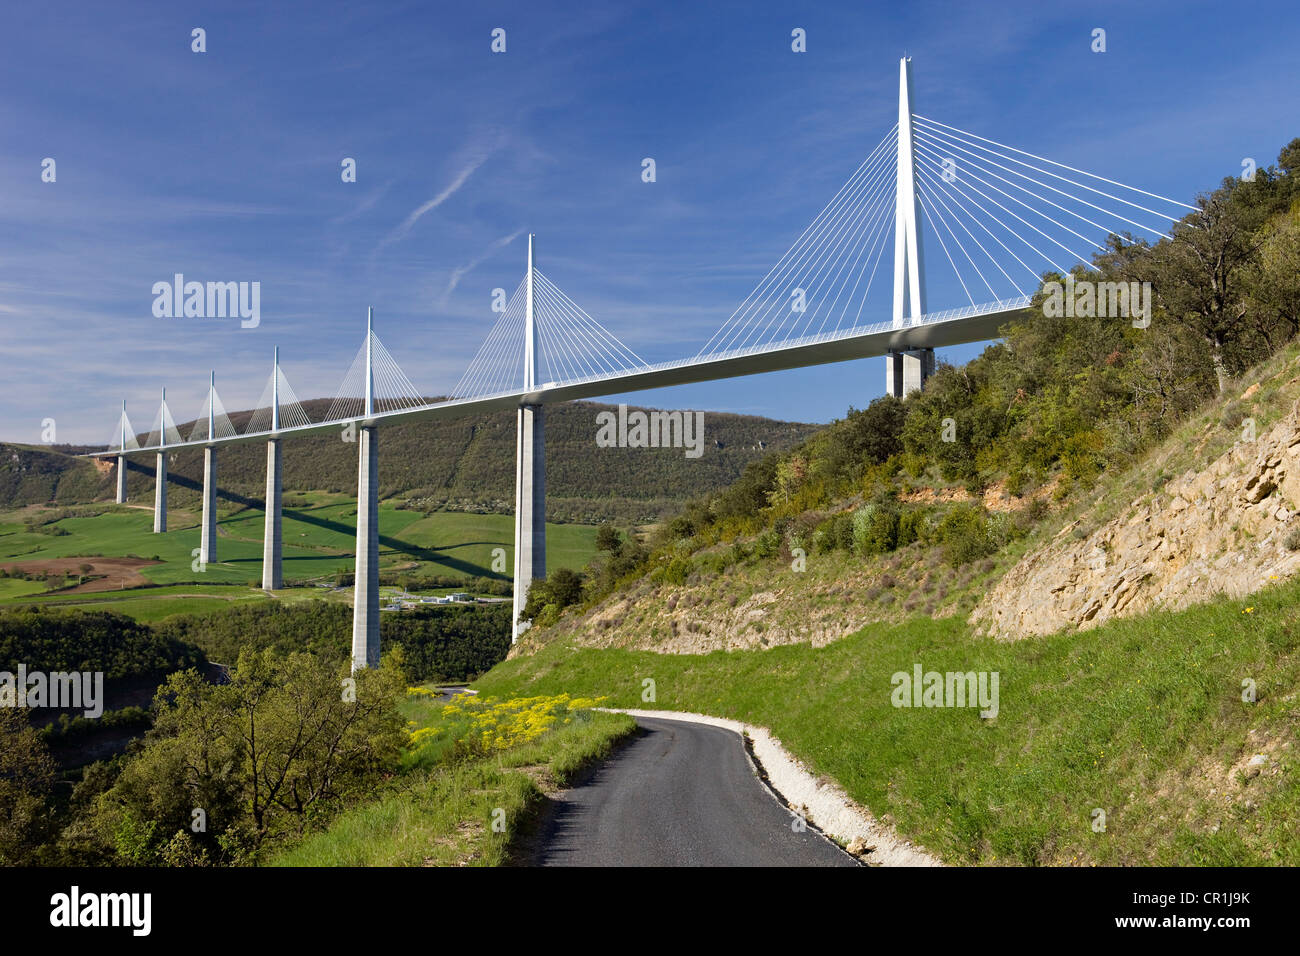 France, Aveyron, Millau Viaduct (A75 Motorway) built by Michel Virlogeux and Norman Foster, located between Causses de Stock Photo